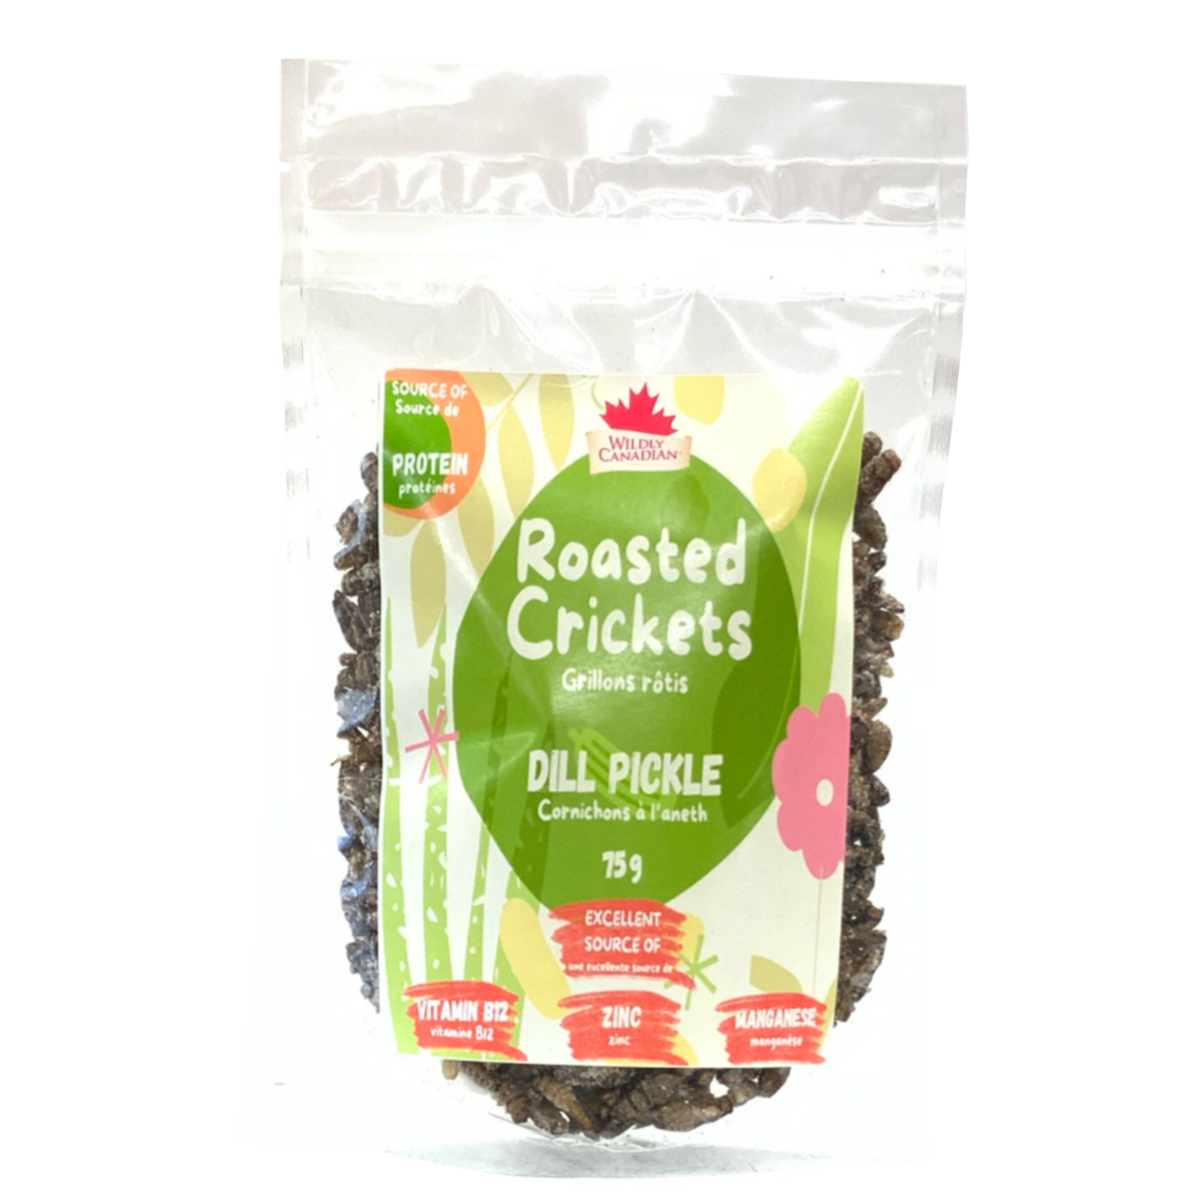 Dill Pickle Roasted Crickets 75g